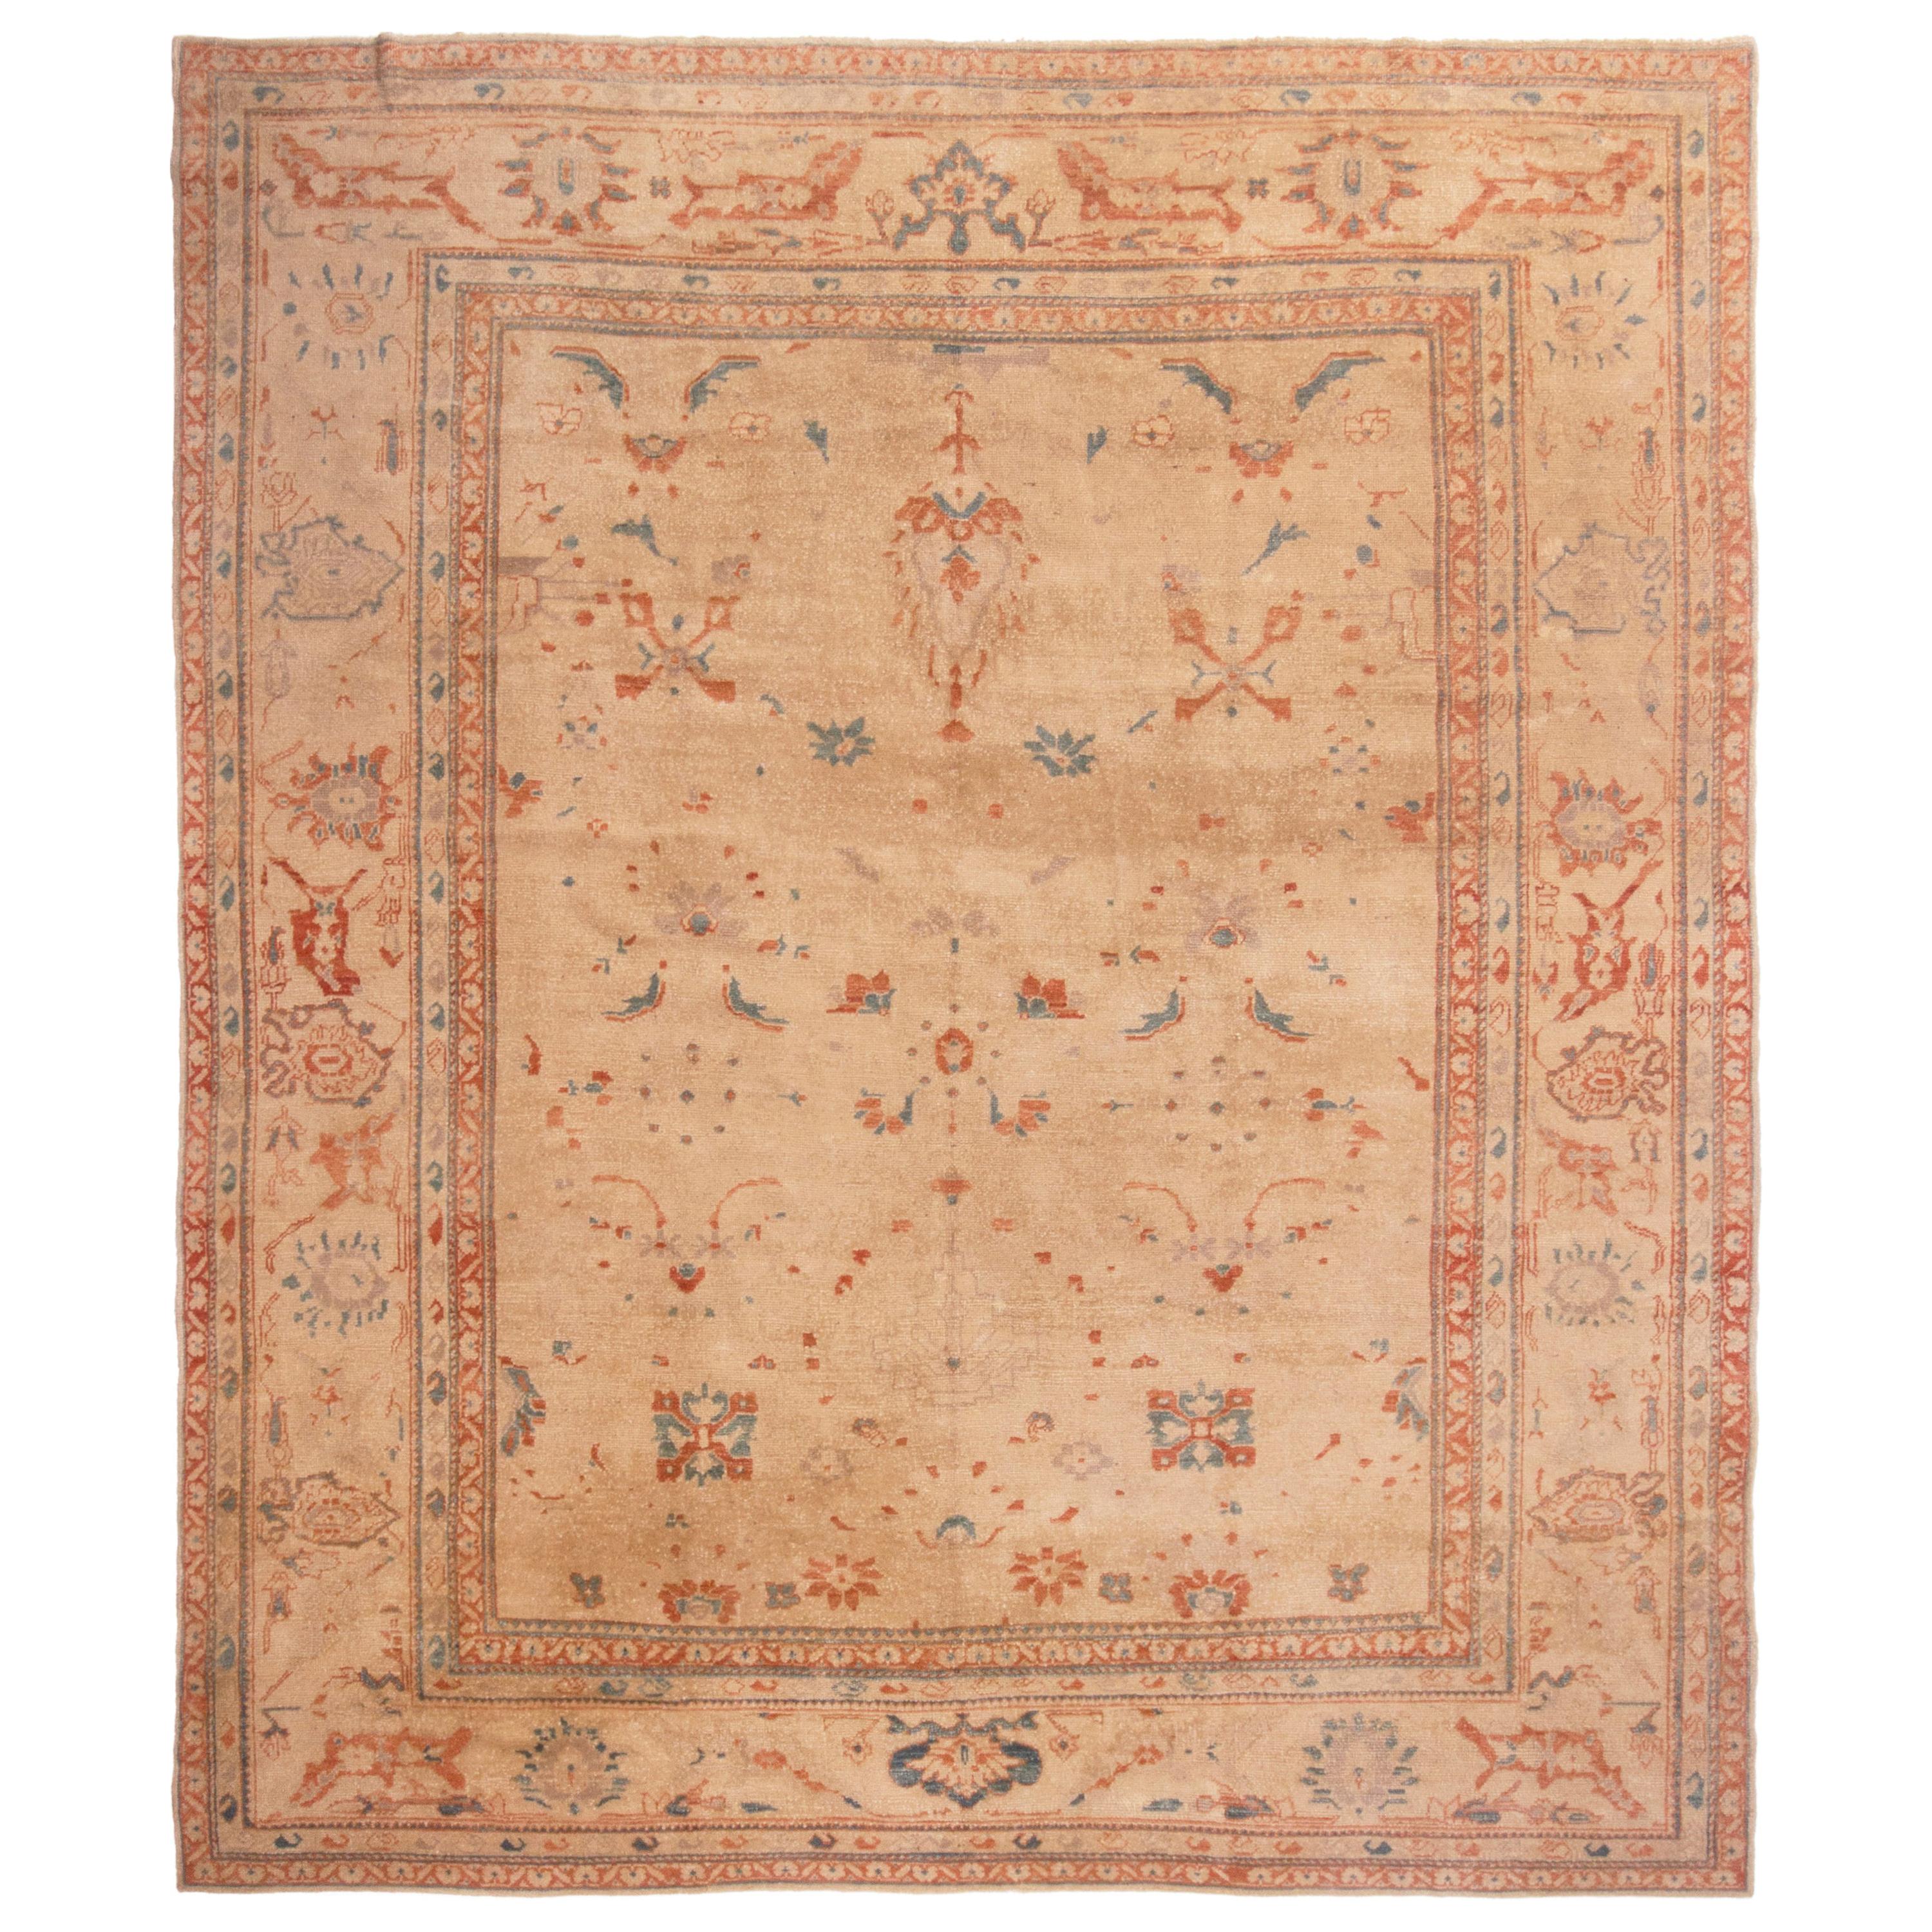 Sultanabad Pink Wool Rug with Geometric-Floral Patterns